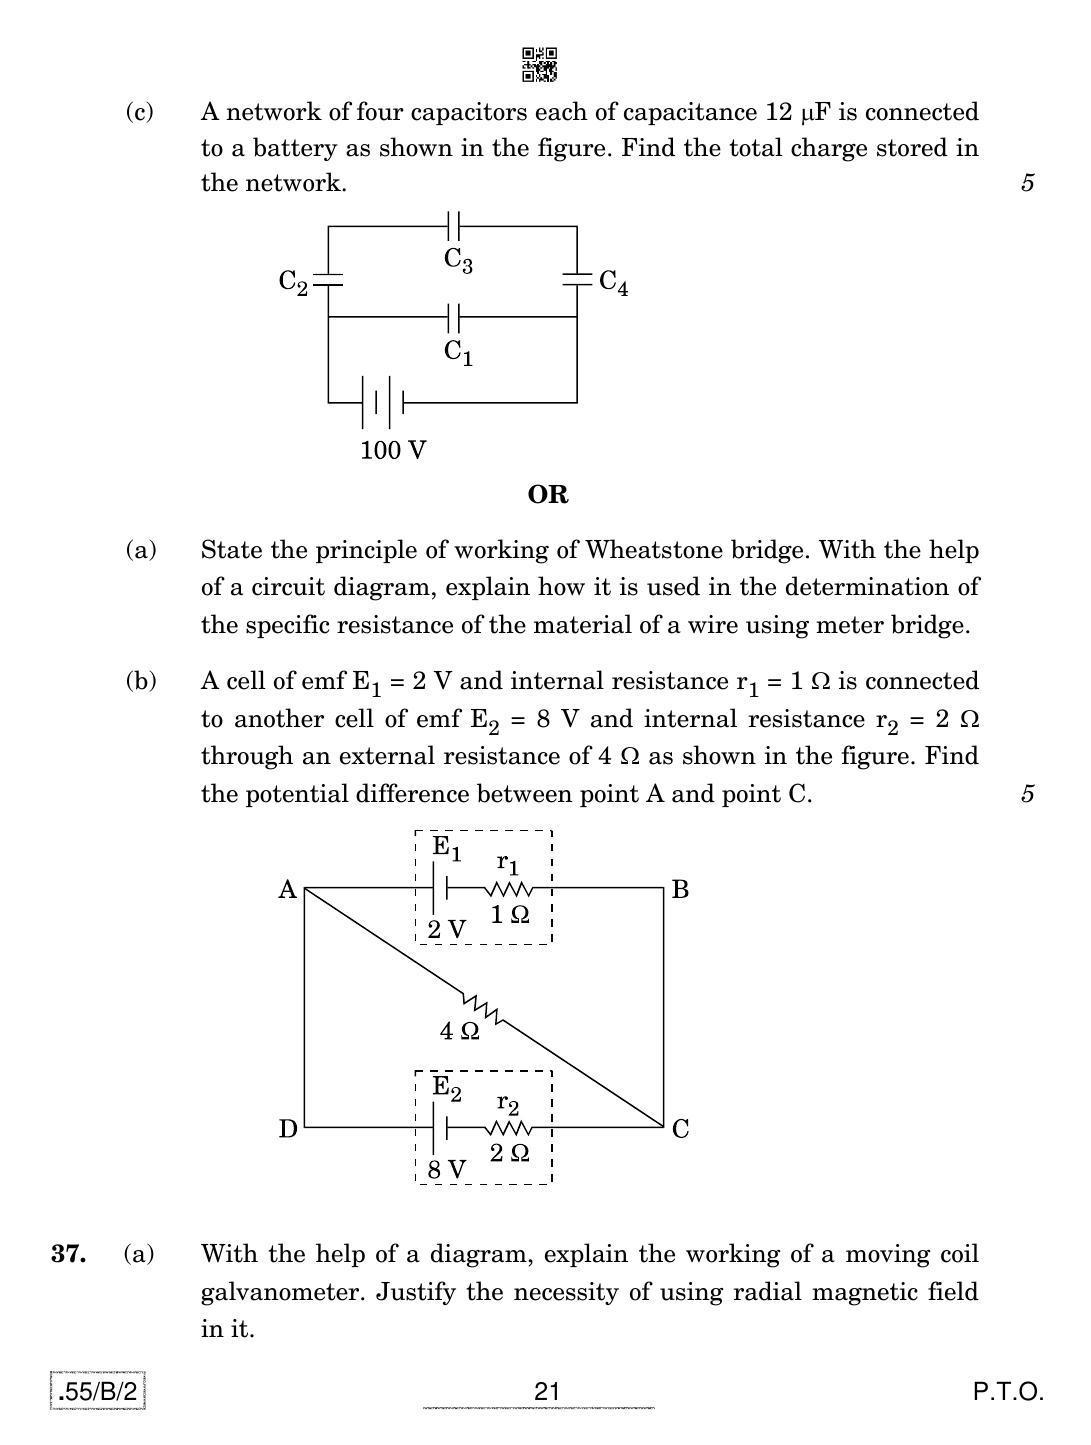 CBSE Class 12 55-C-2 - Physics 2020 Compartment Question Paper - Page 21